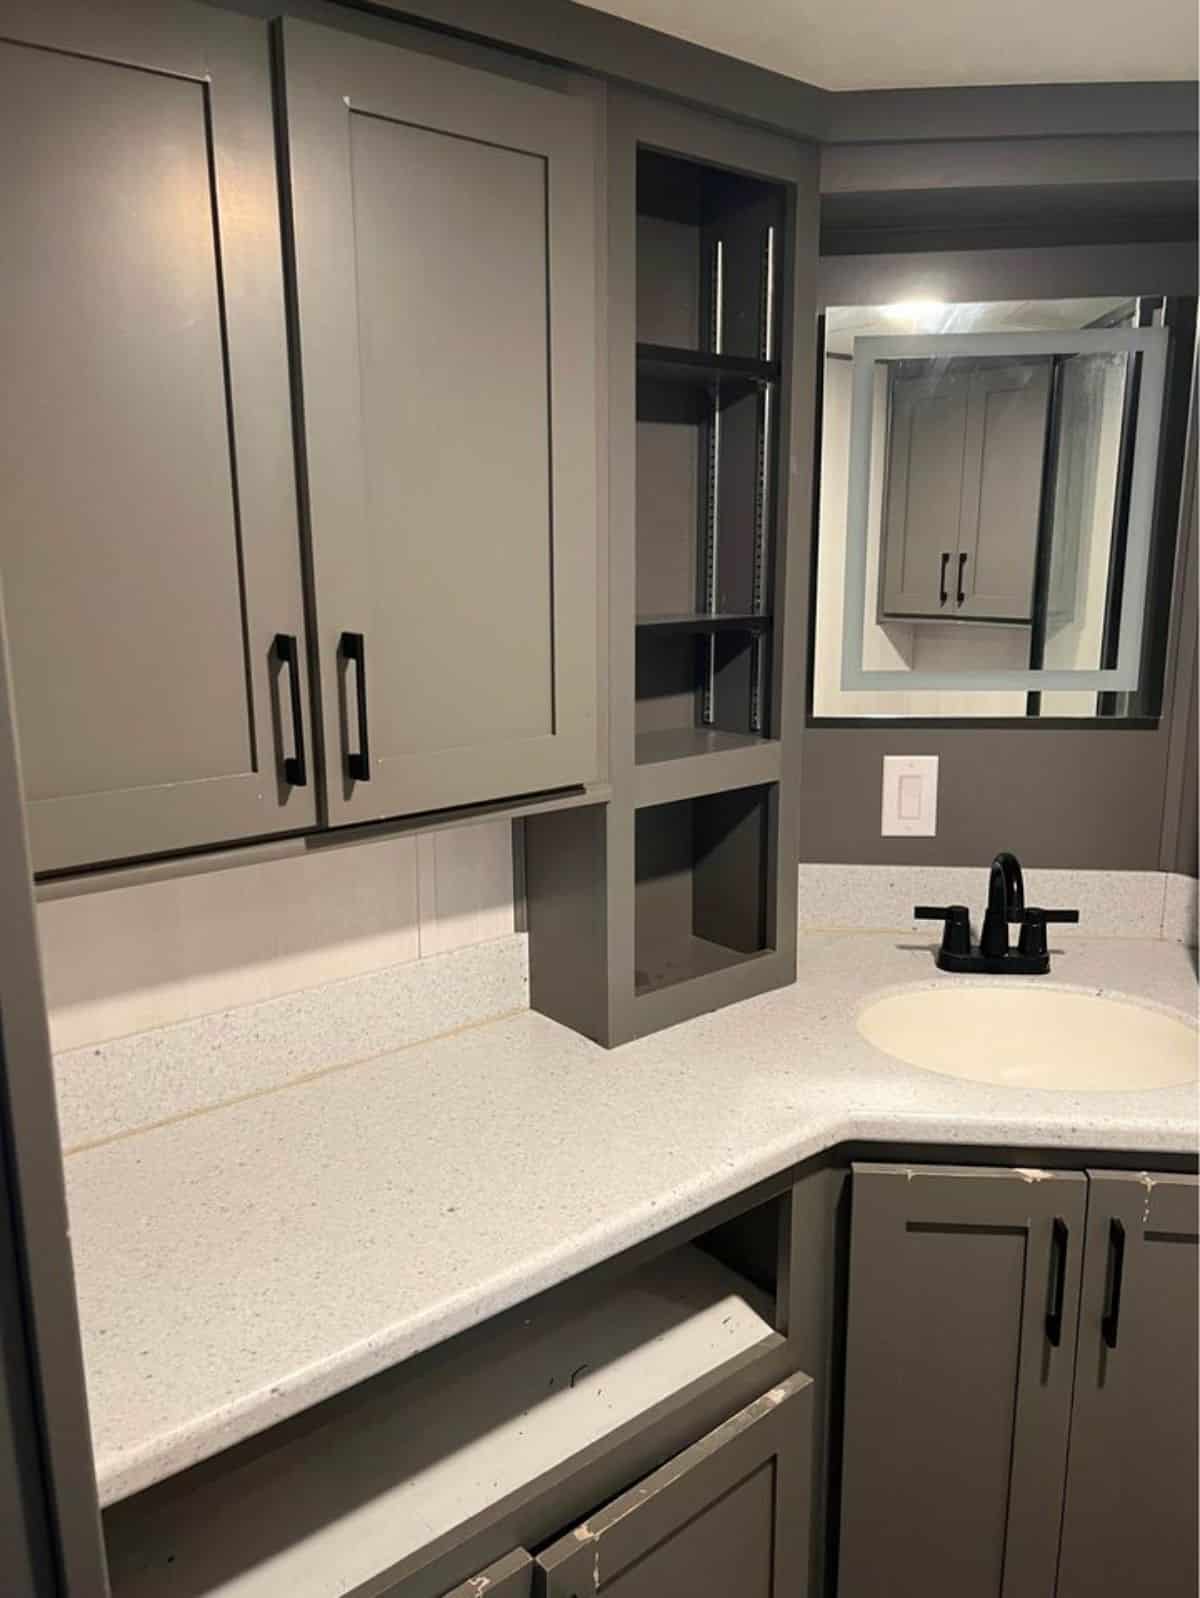 Sink with vanity and mirror with lost of storage cabinets in bathroom of 399 sf Park Model Tiny House